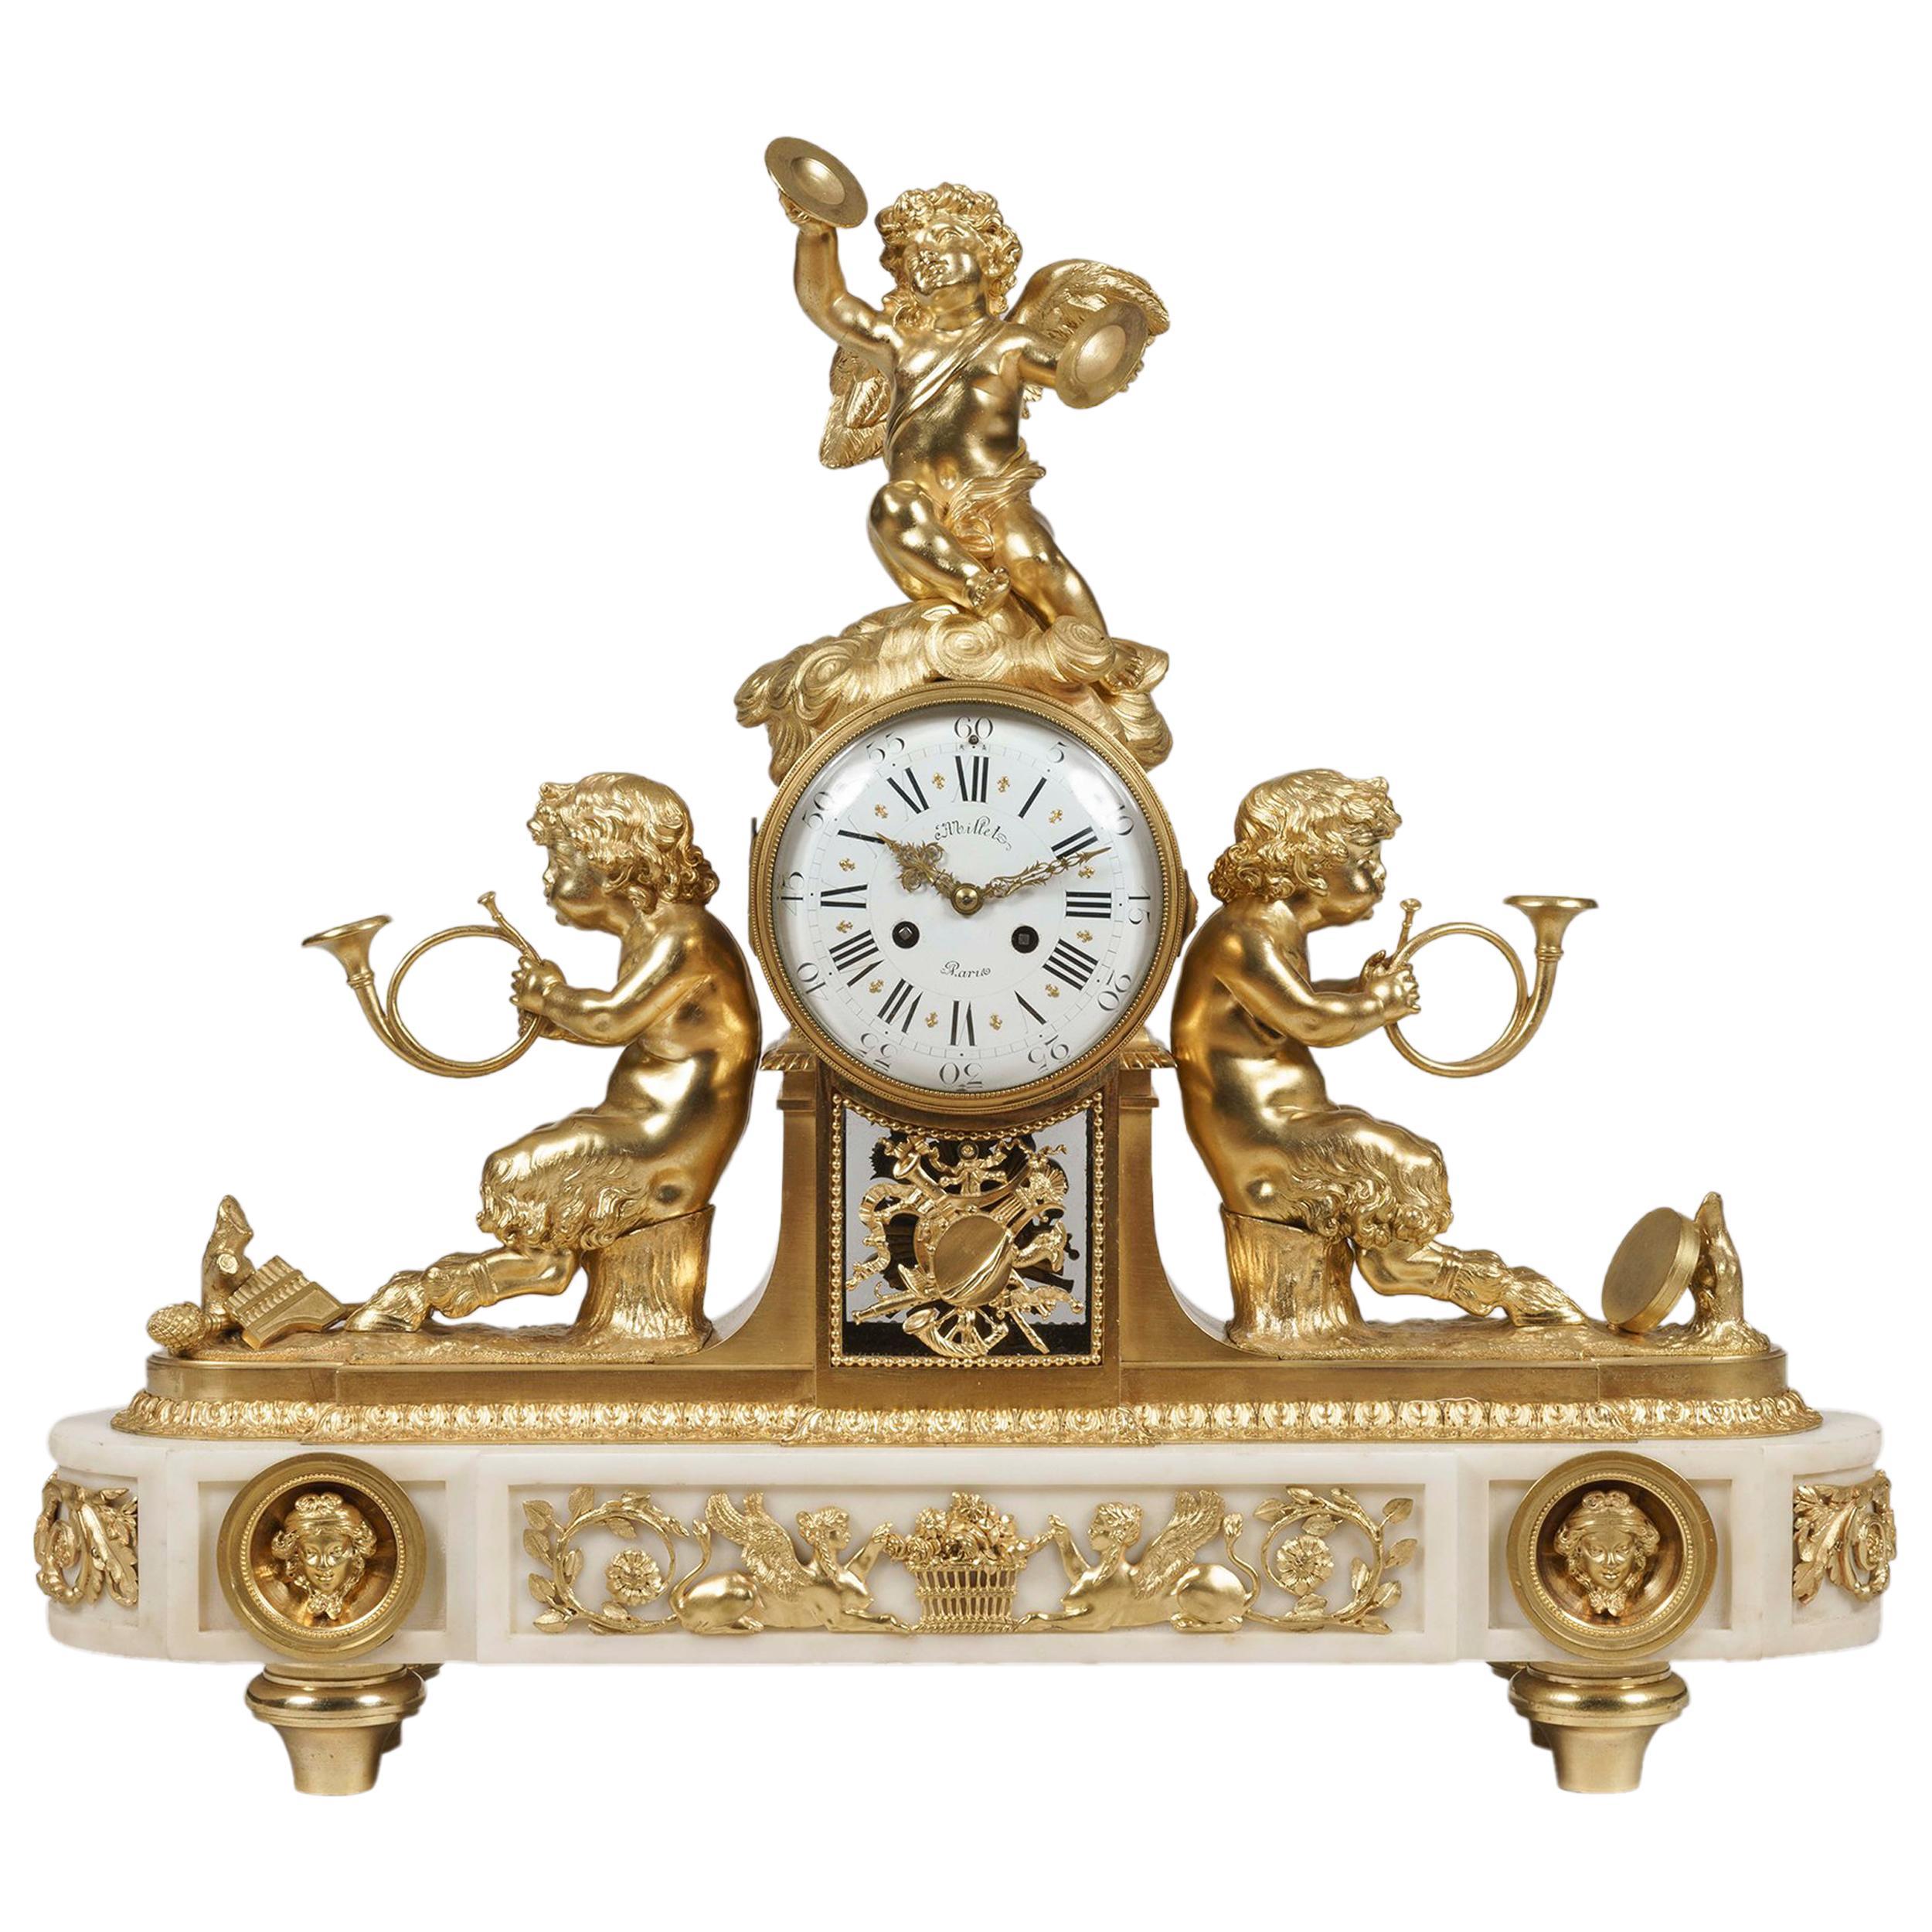 19th Century Louis XV Manner Ormolu and Marble Mantle Clock by Millet of Paris